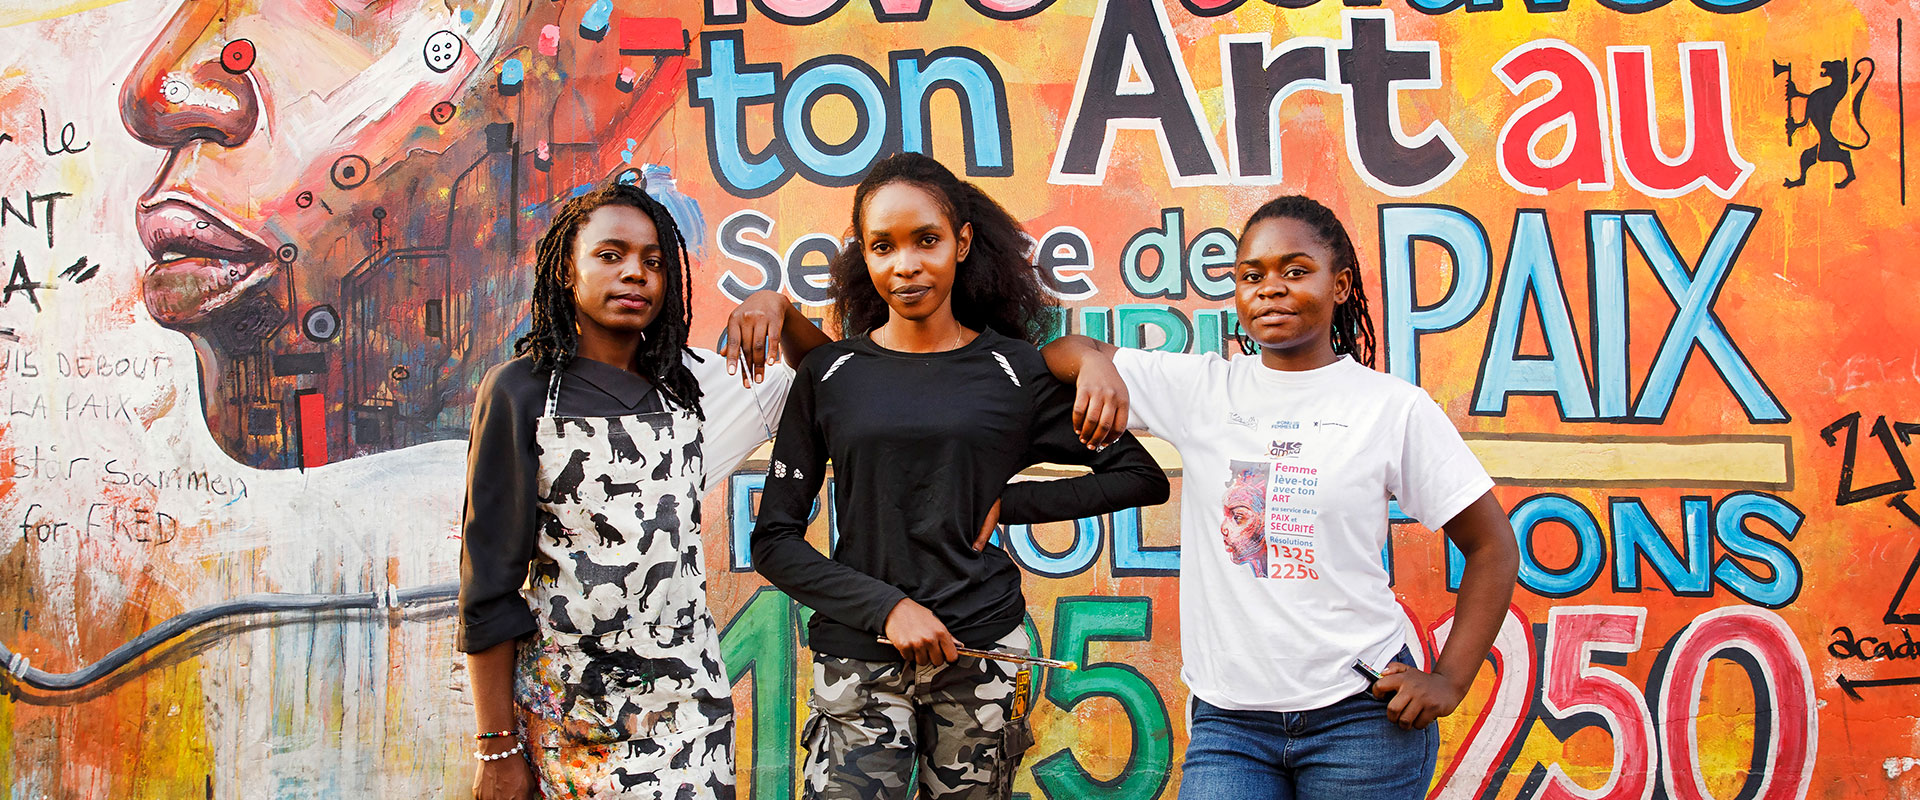 In Goma, Democratic Republic of Congo, artists (left to right) Edith Congane, Linda Bindu Rose and Esther Amisi Estam create works of art that reflect peace and tolerance as part of a UN Women-supported arts organization The Art of Peace - UJADP.